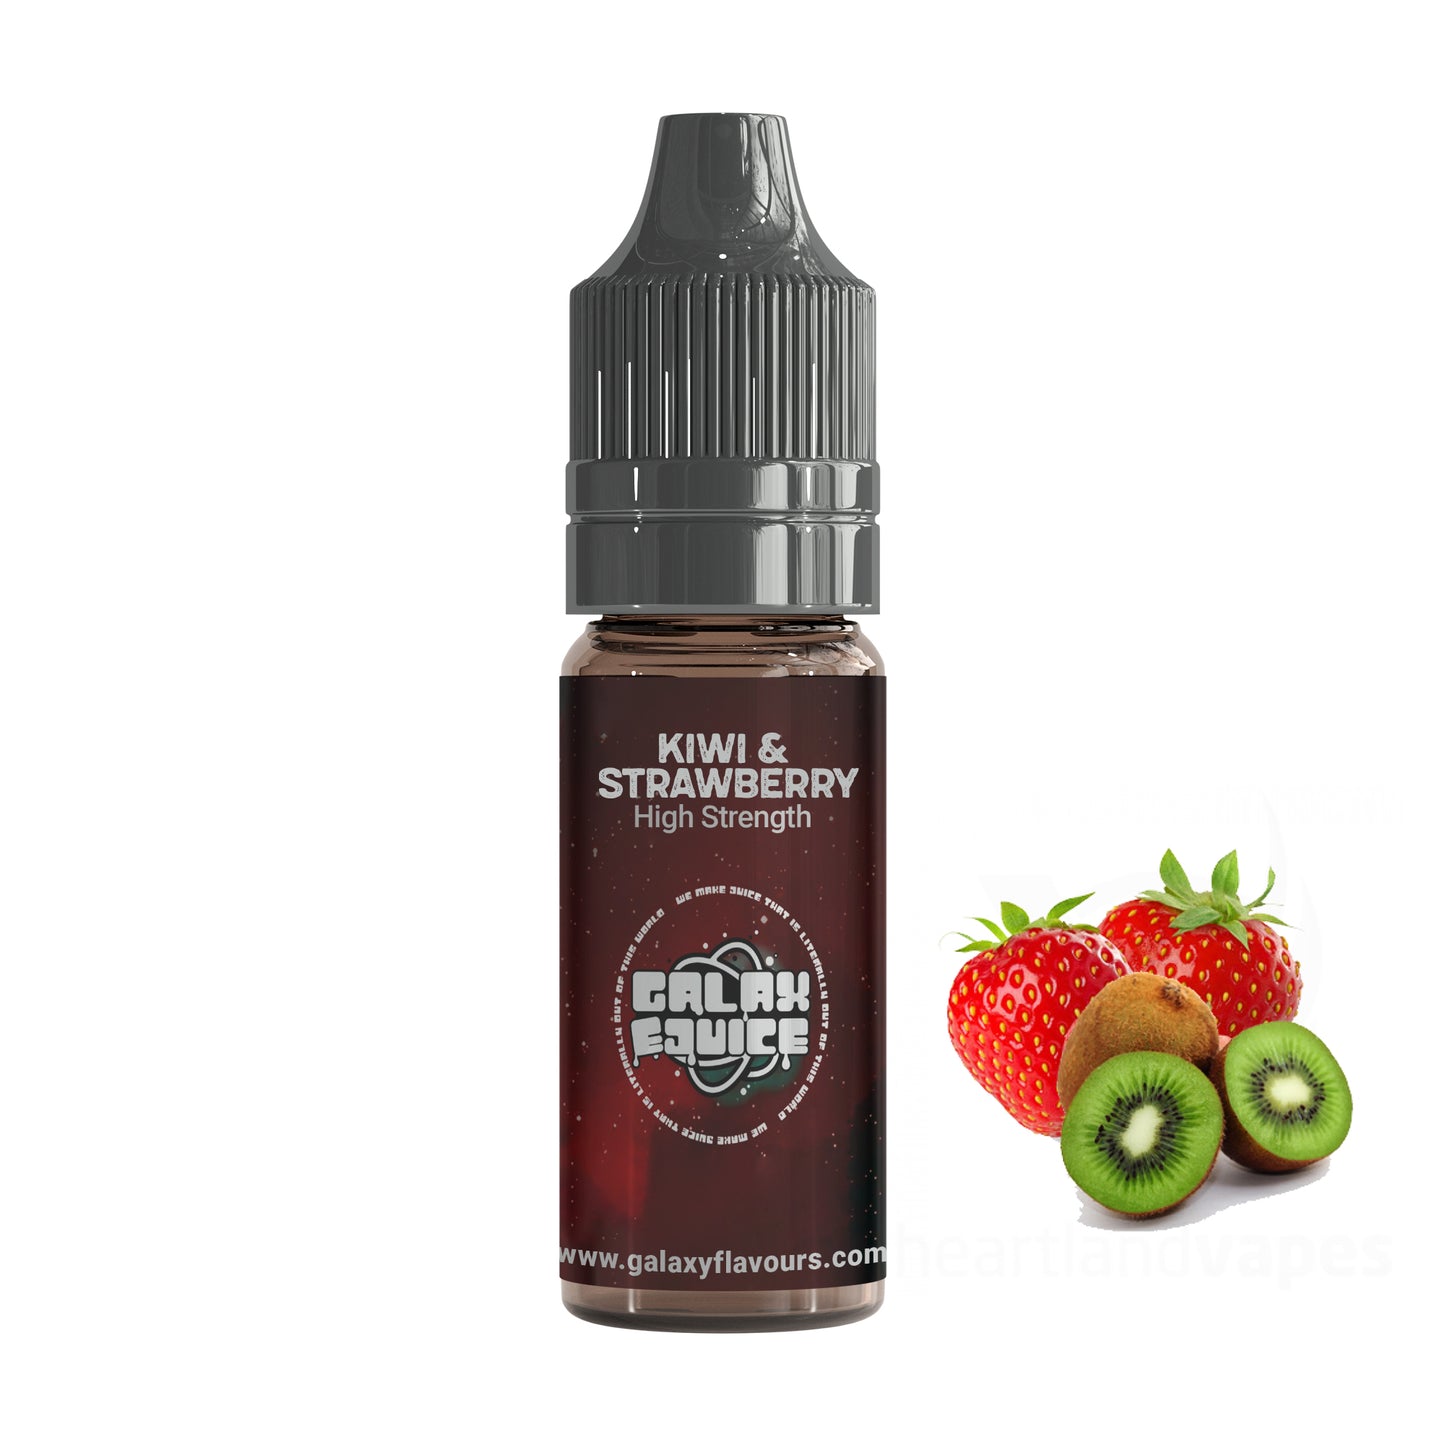 Kiwi and Strawberry High Strength Professional Flavouring.